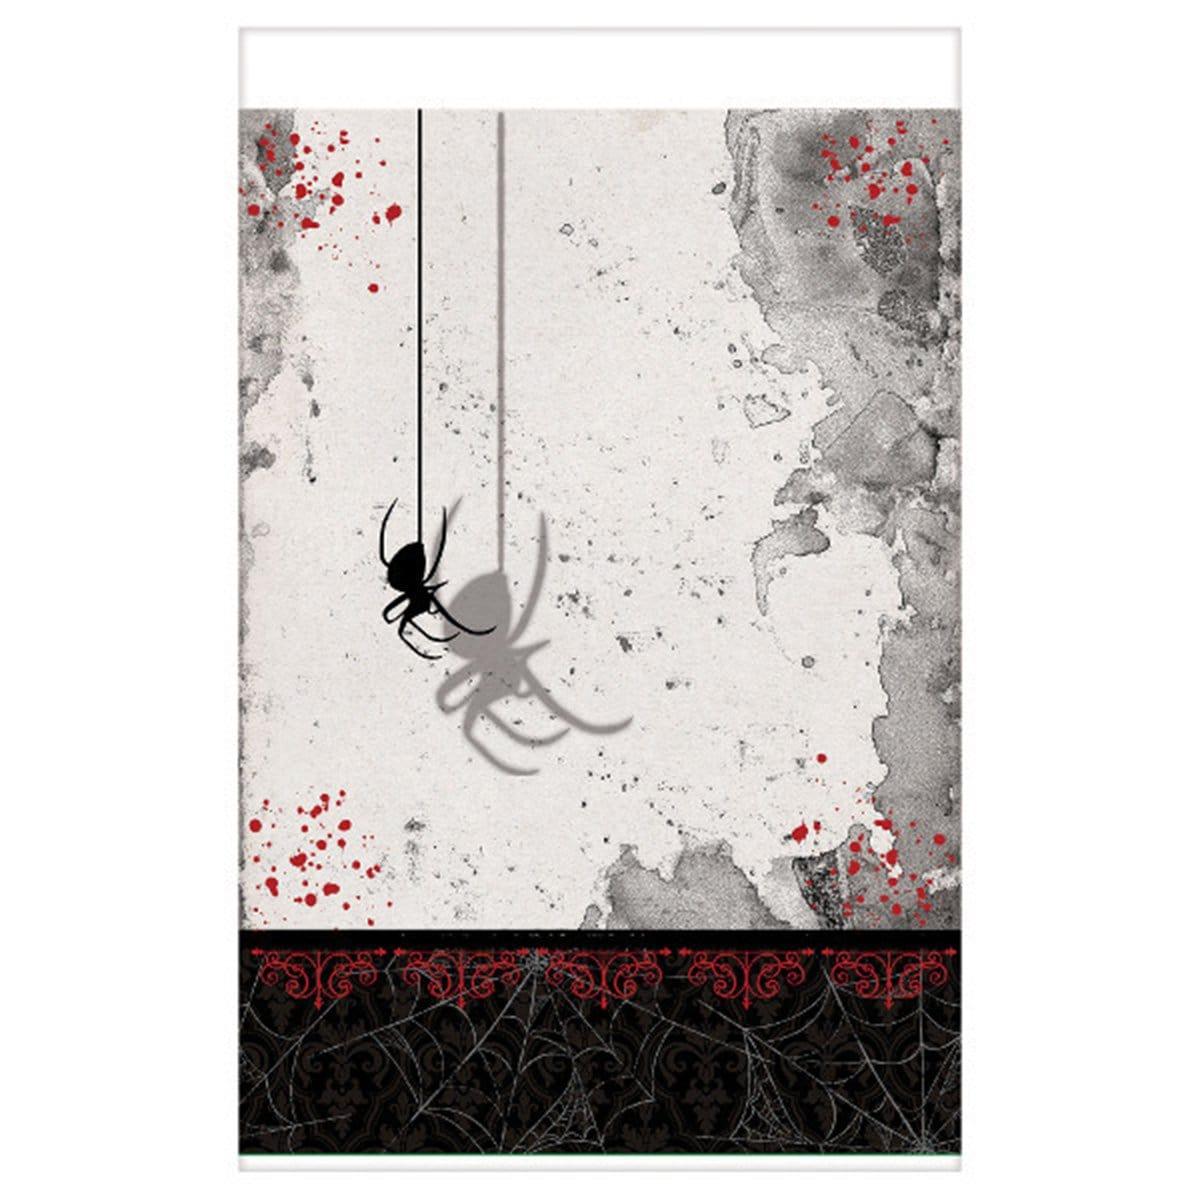 Buy Halloween Dark Manor tablecover sold at Party Expert